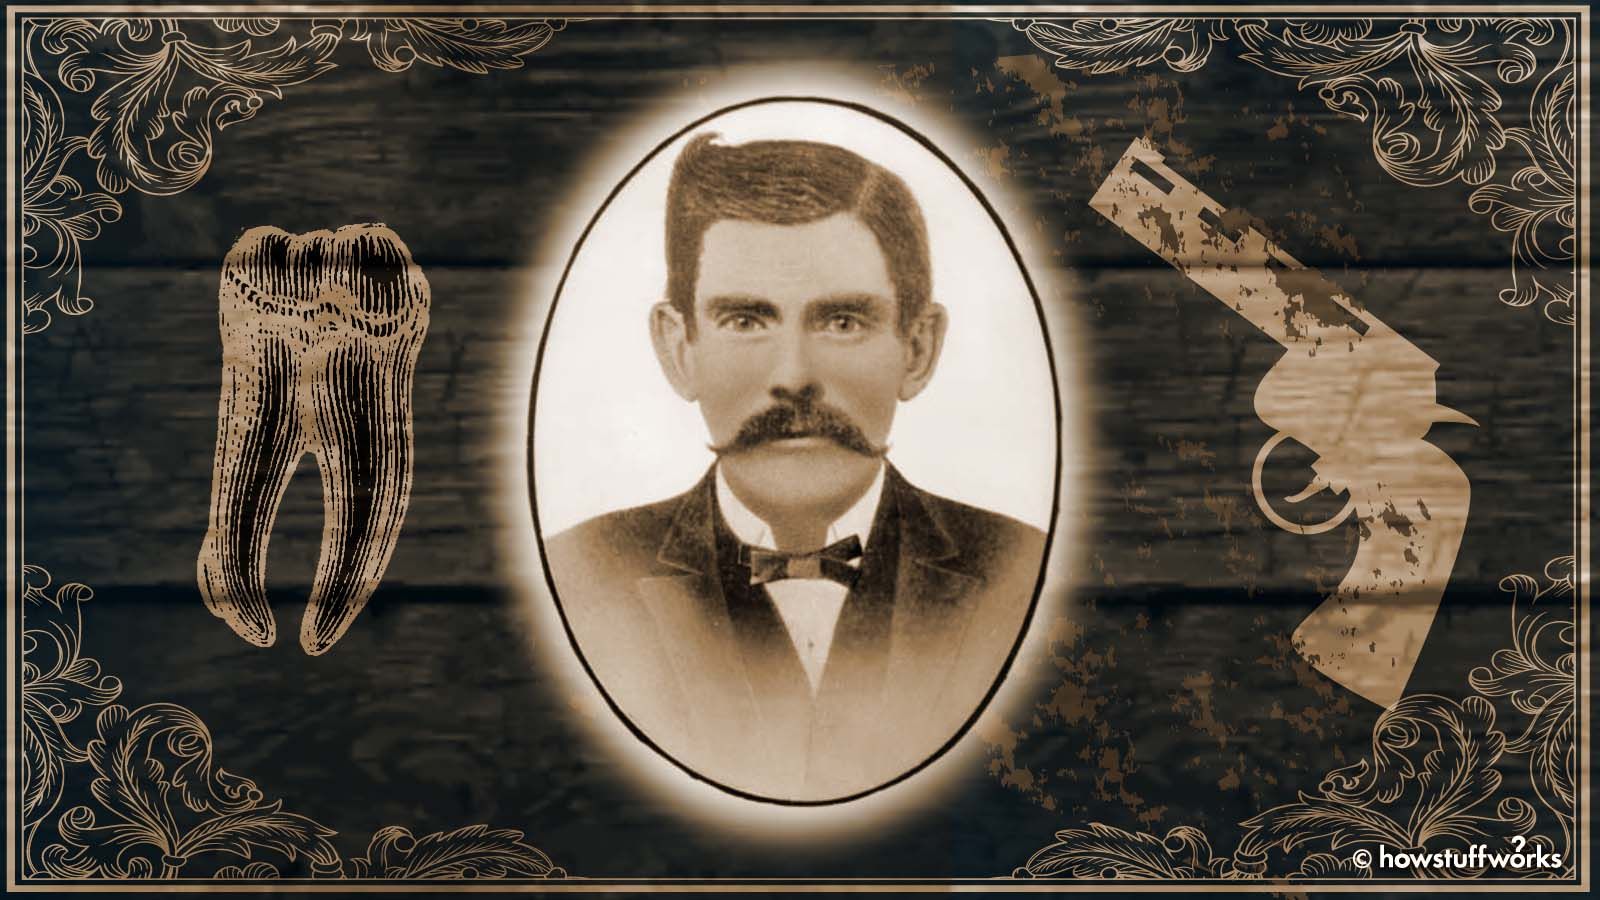 Facts About the Wild West's Deadly 'Doc' Holliday